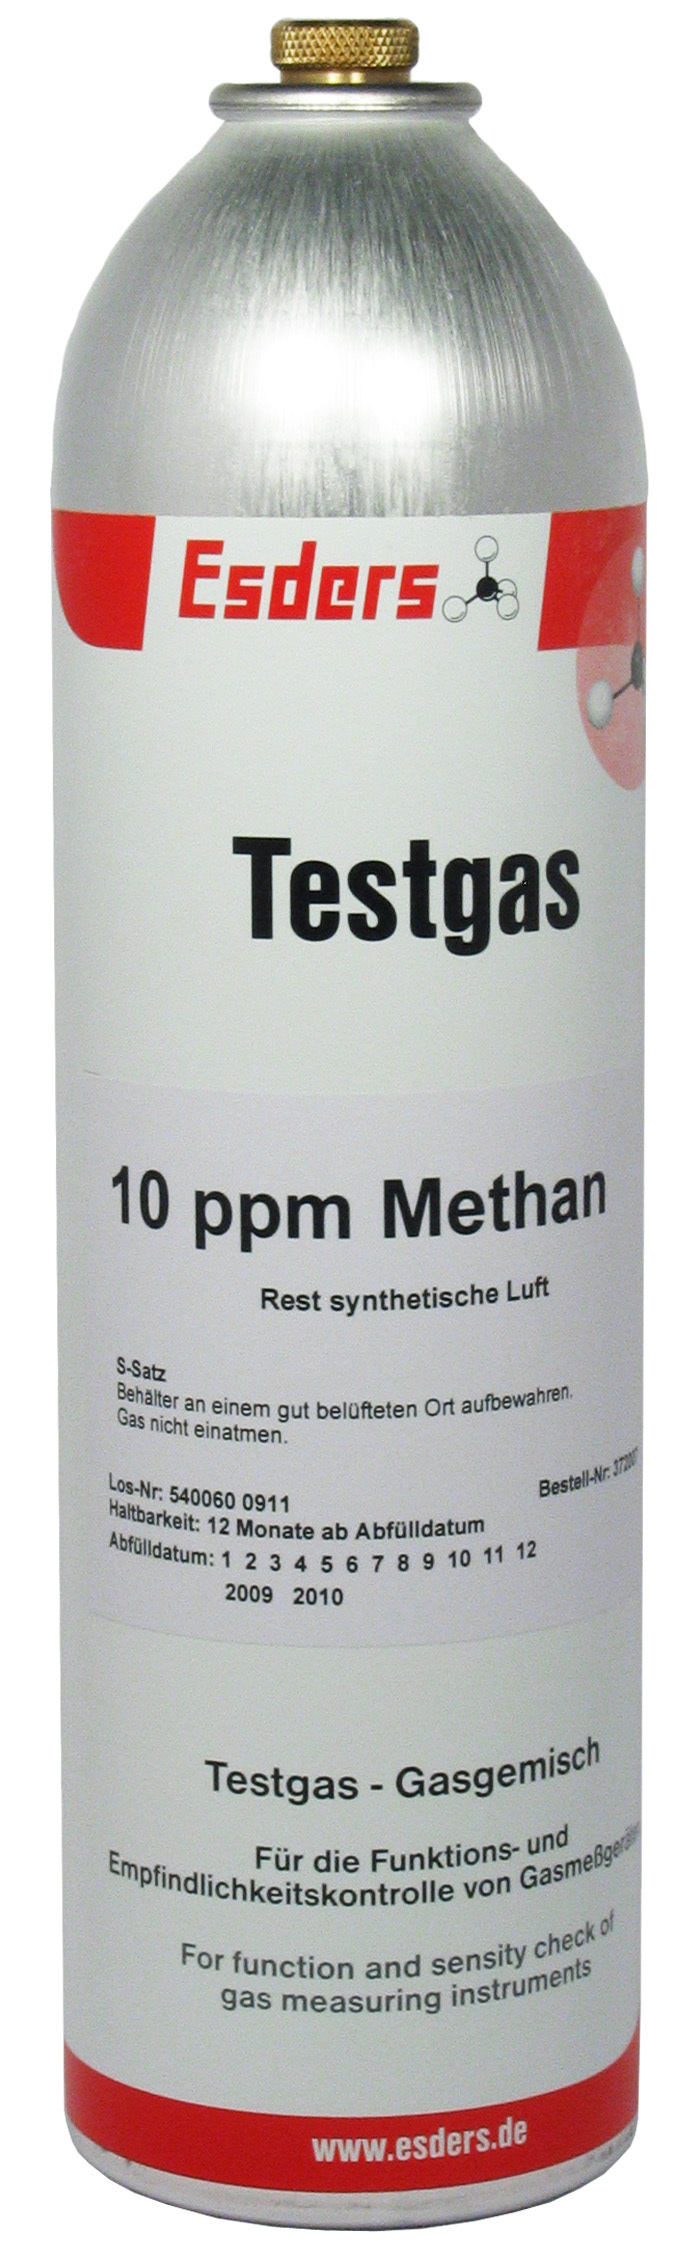 Test gas can 10 ppm methane